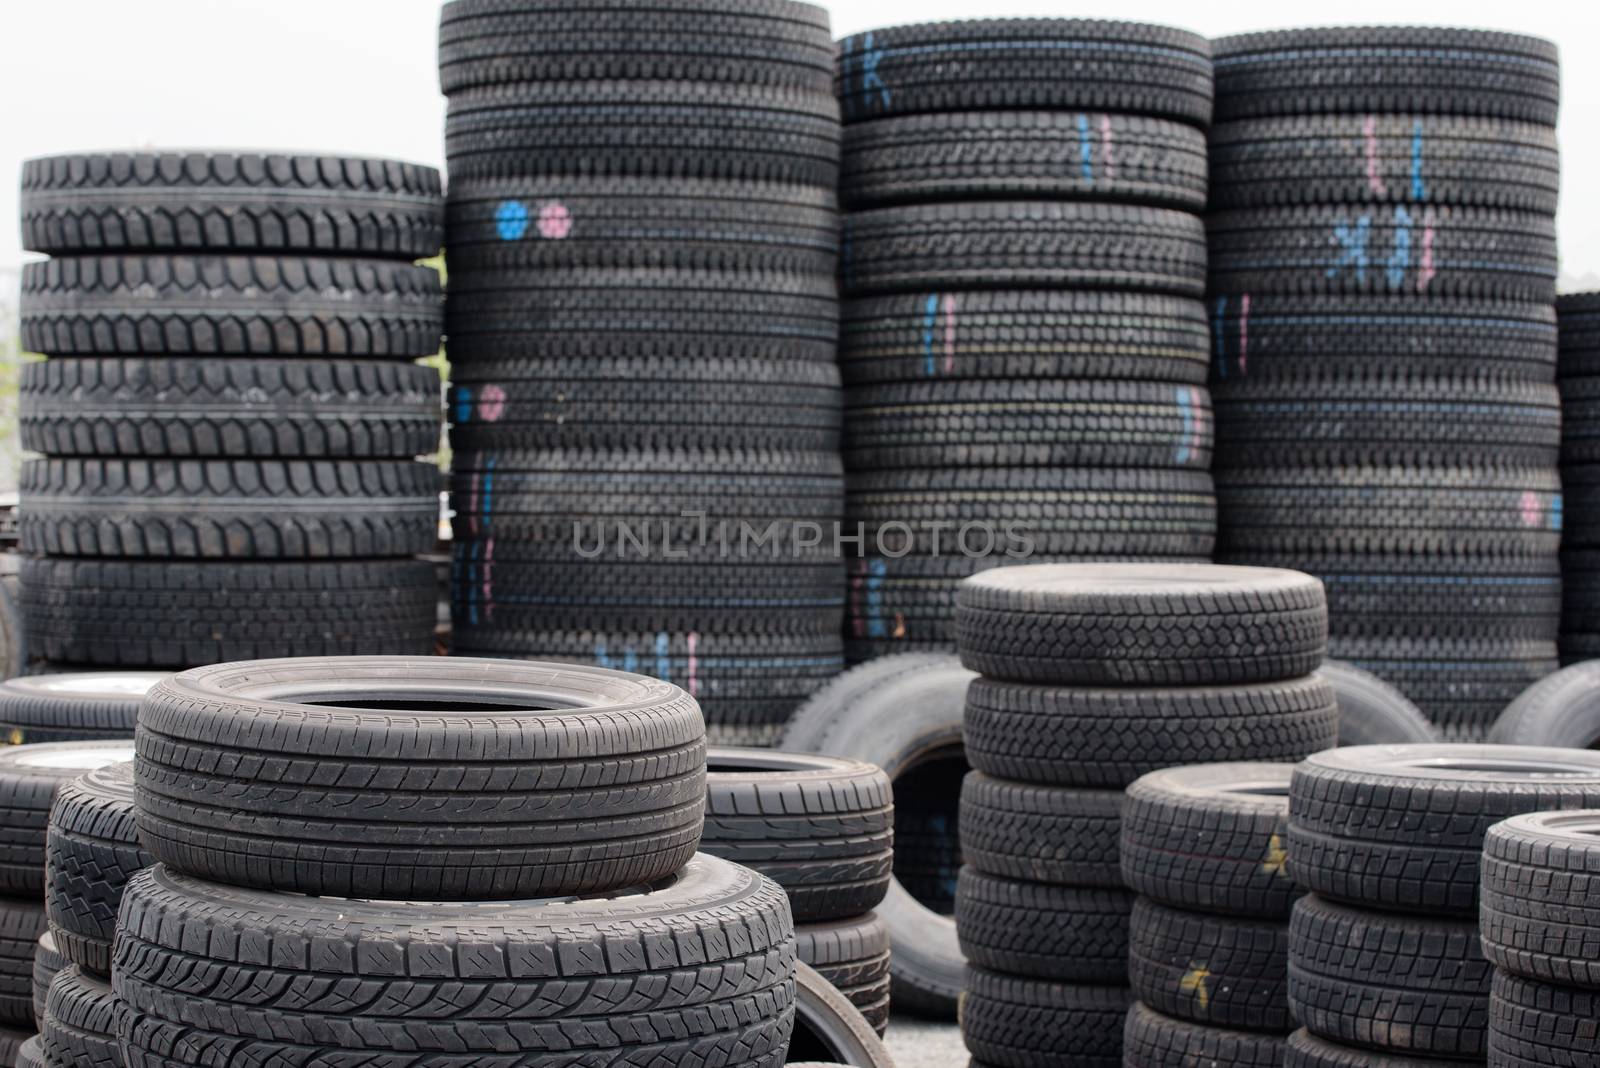 old car tires by Visual-Content